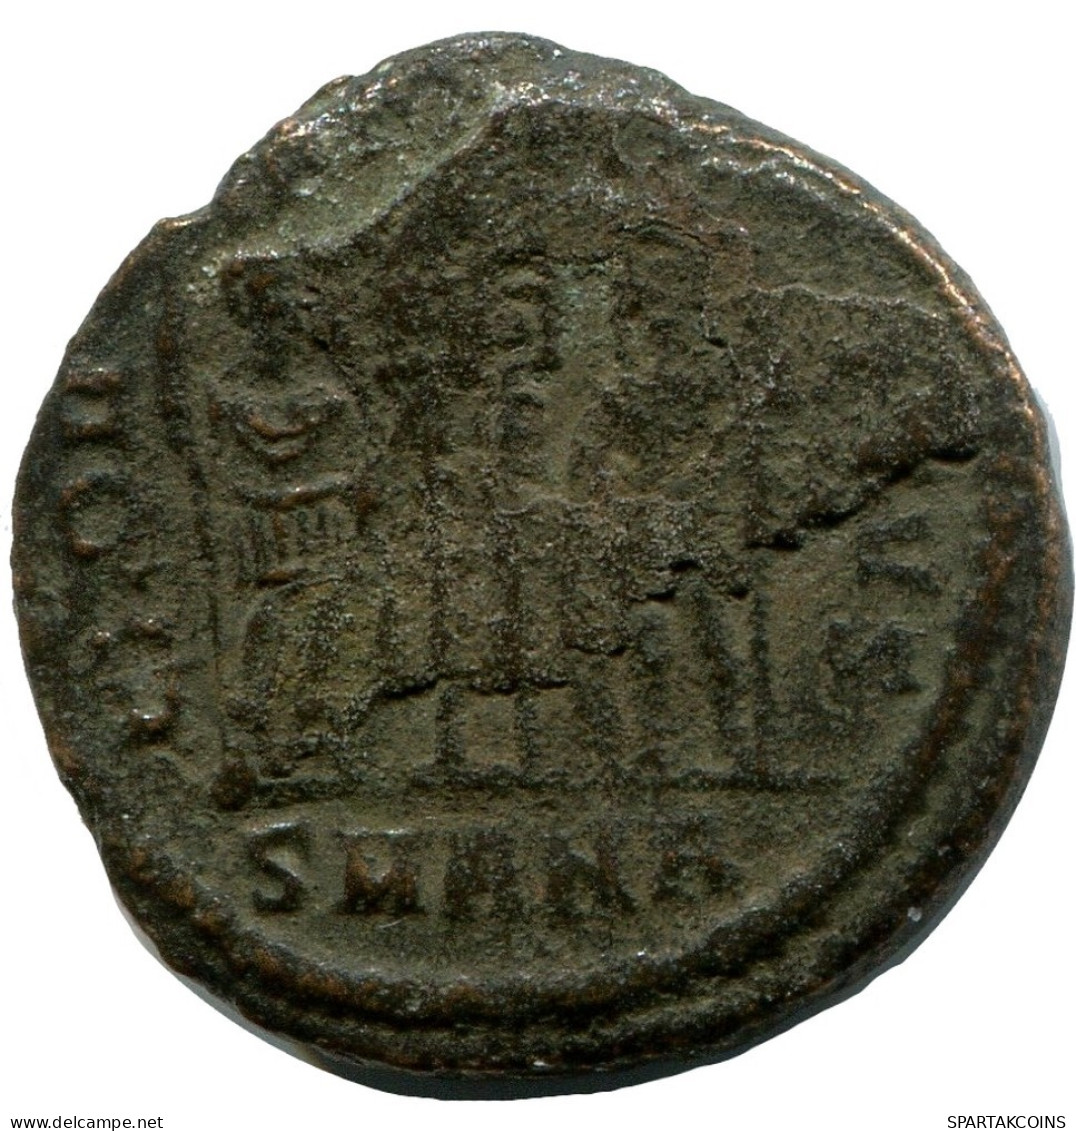 CONSTANTINE I MINTED IN ANTIOCH FOUND IN IHNASYAH HOARD EGYPT #ANC10626.14.F.A - The Christian Empire (307 AD To 363 AD)